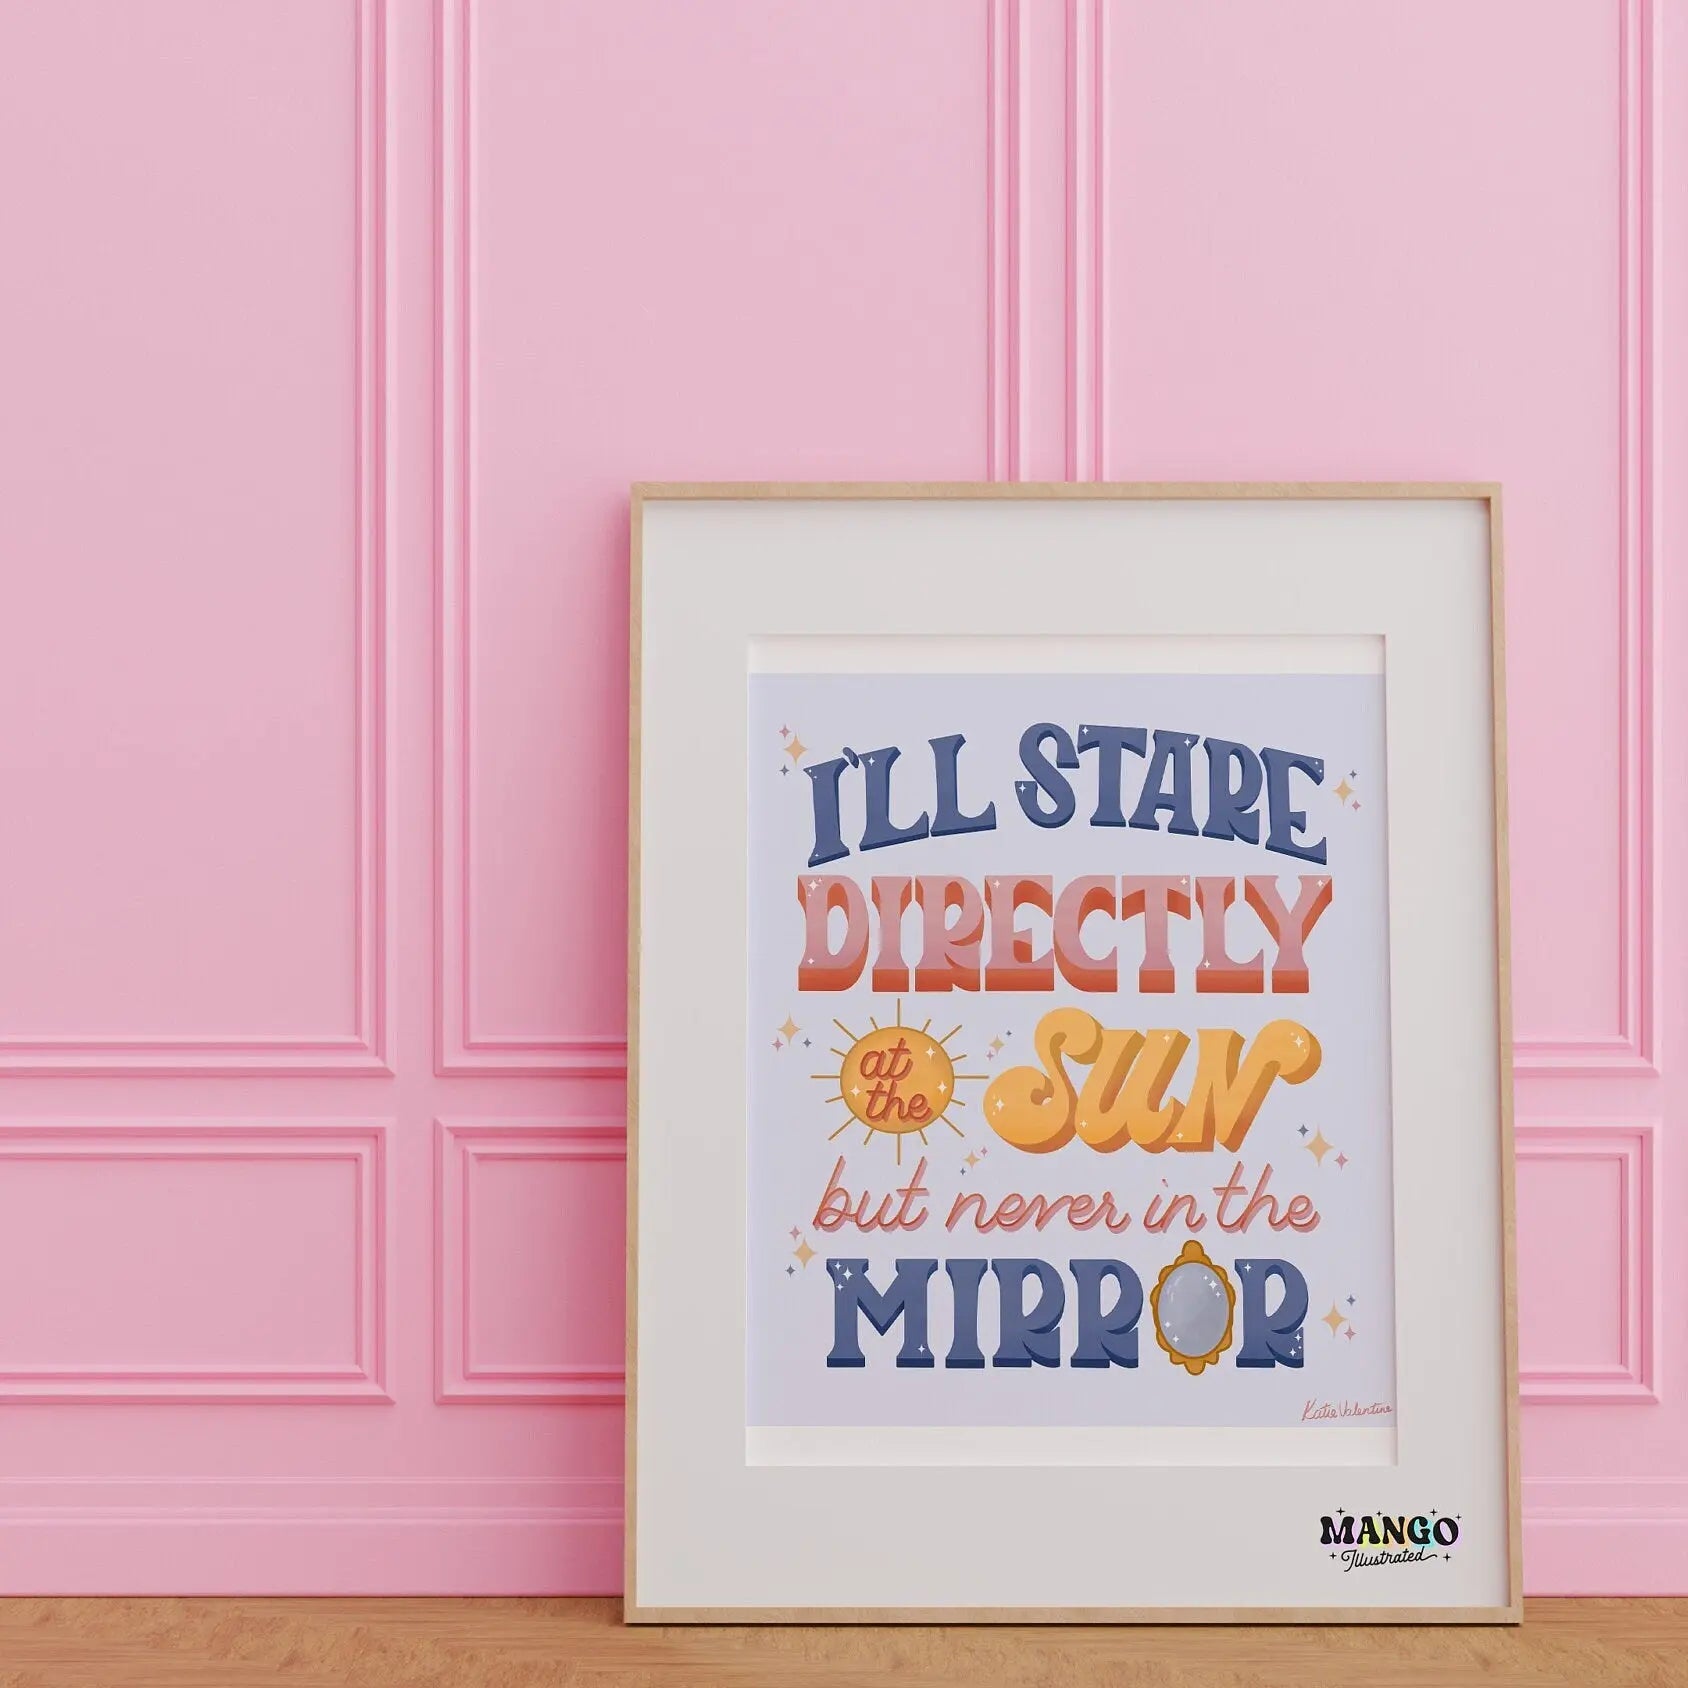 I’ll Stare Directly at the Sun but Never in the Mirror art print MangoIllustrated